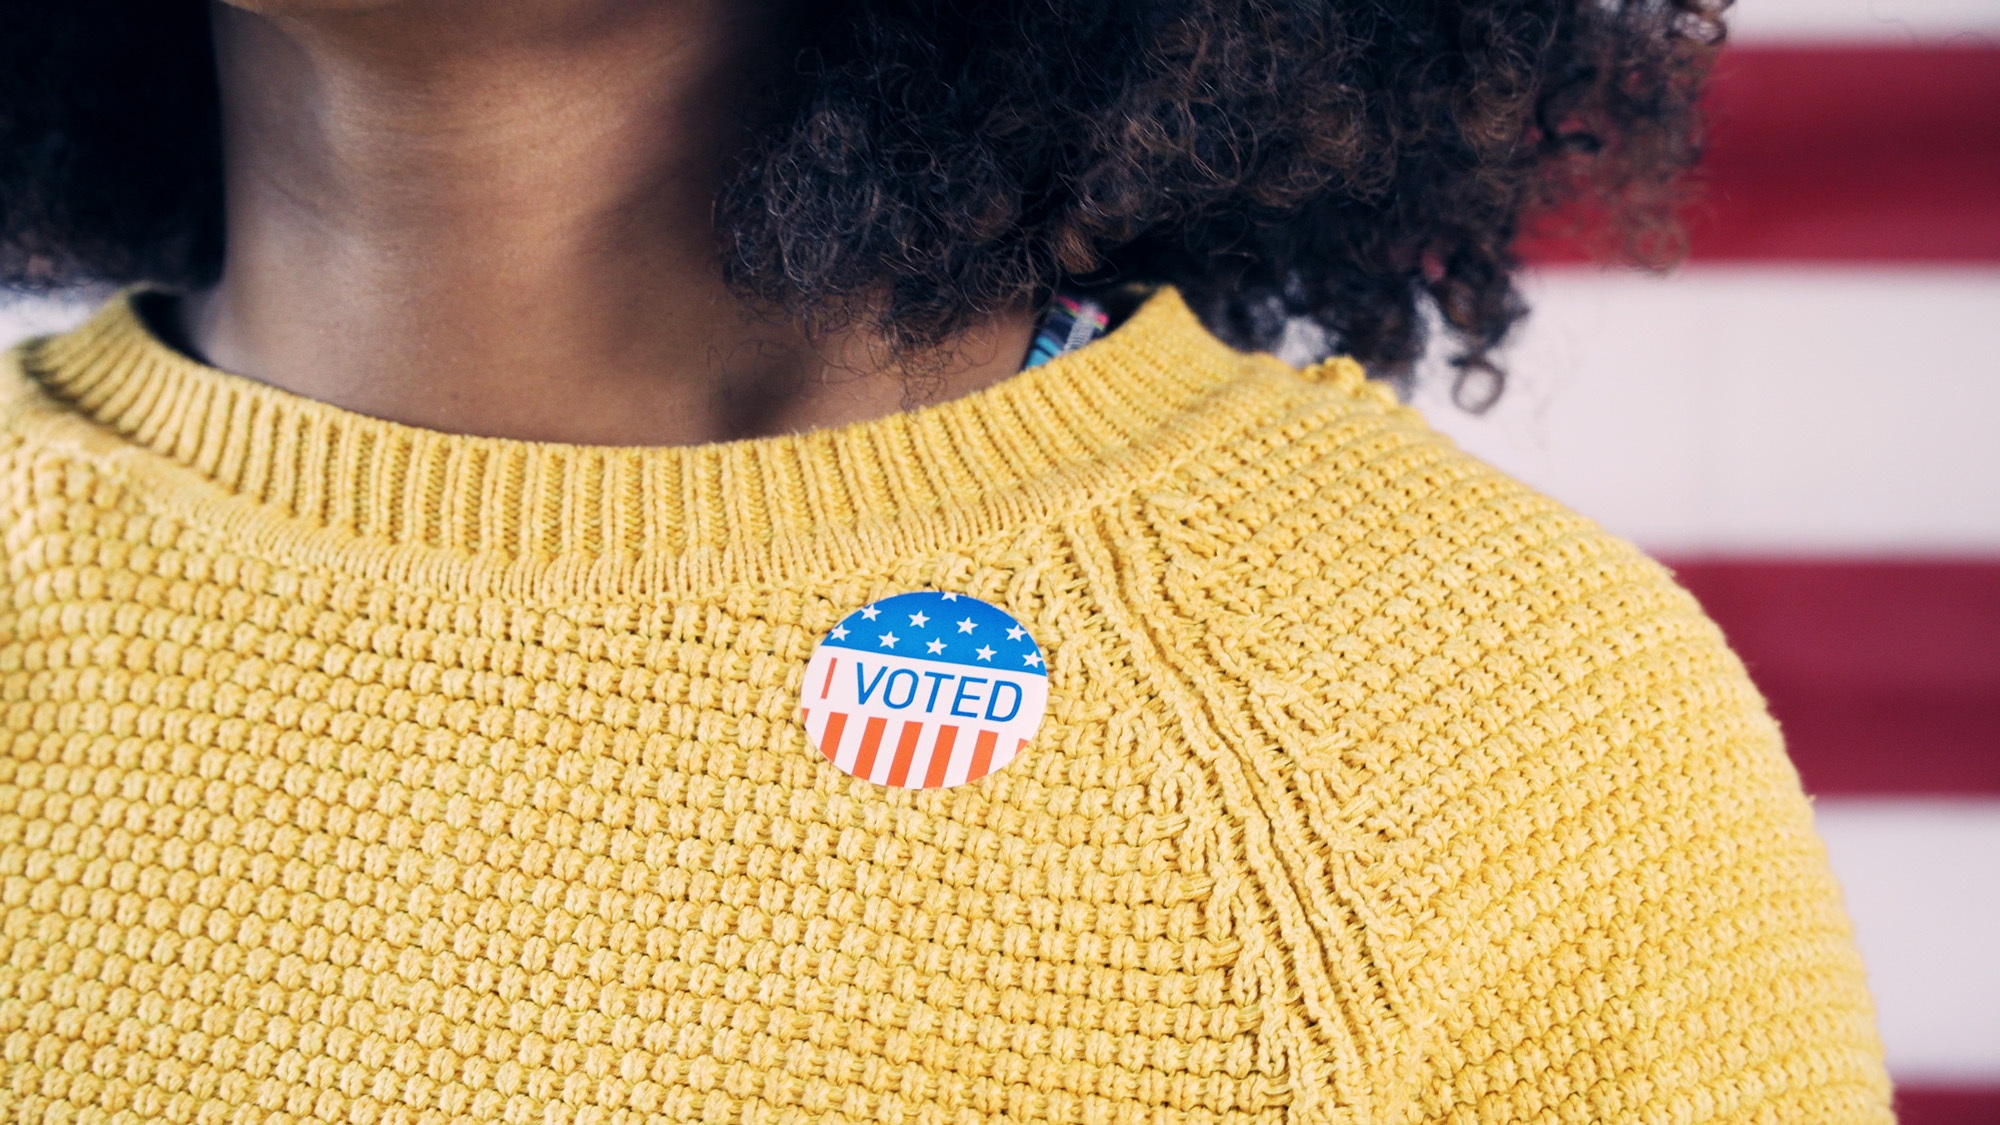 A woman with brown skin and curly hair wears a yellow sweater. Upon that sweater, she wears a sticker that states, "I VOTED" with white stars on blue background, and red and white stripes. 